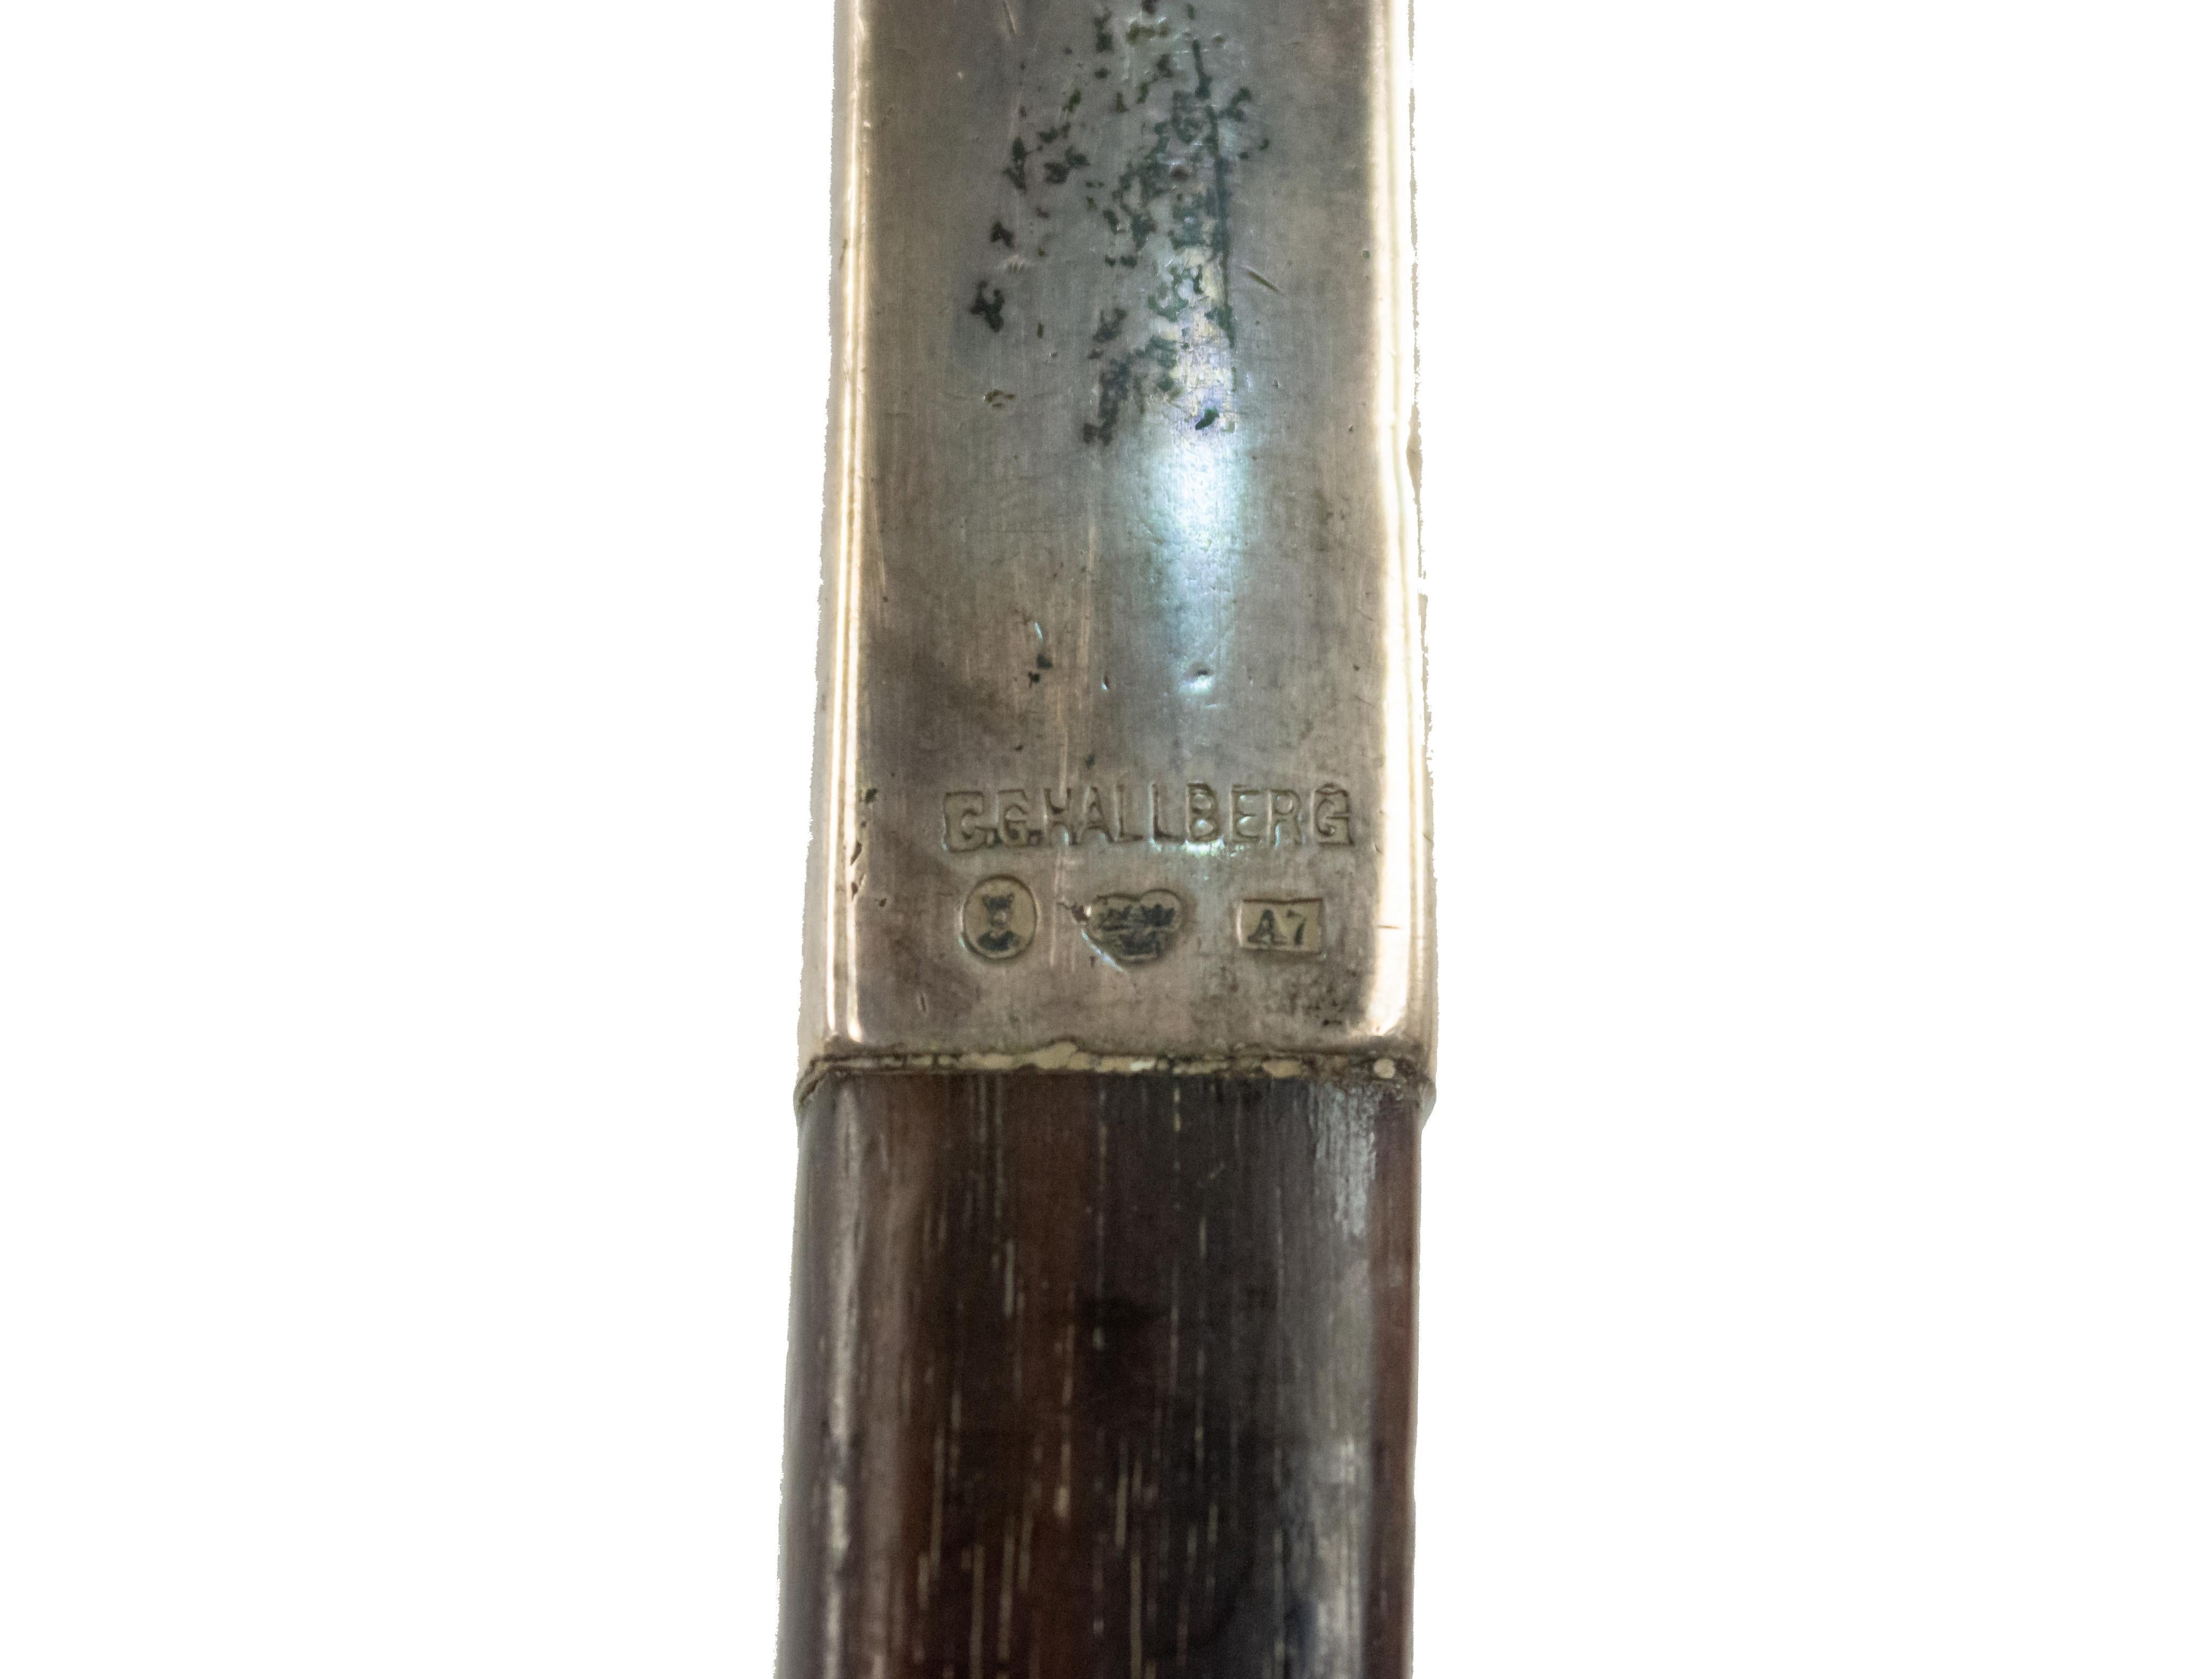 Swedish Edwardian ebony square shaped cane with simple silver handle. Hallmarks on handle with C. G. Hallberg stamp. Engraved name of prior owner at handle in script.